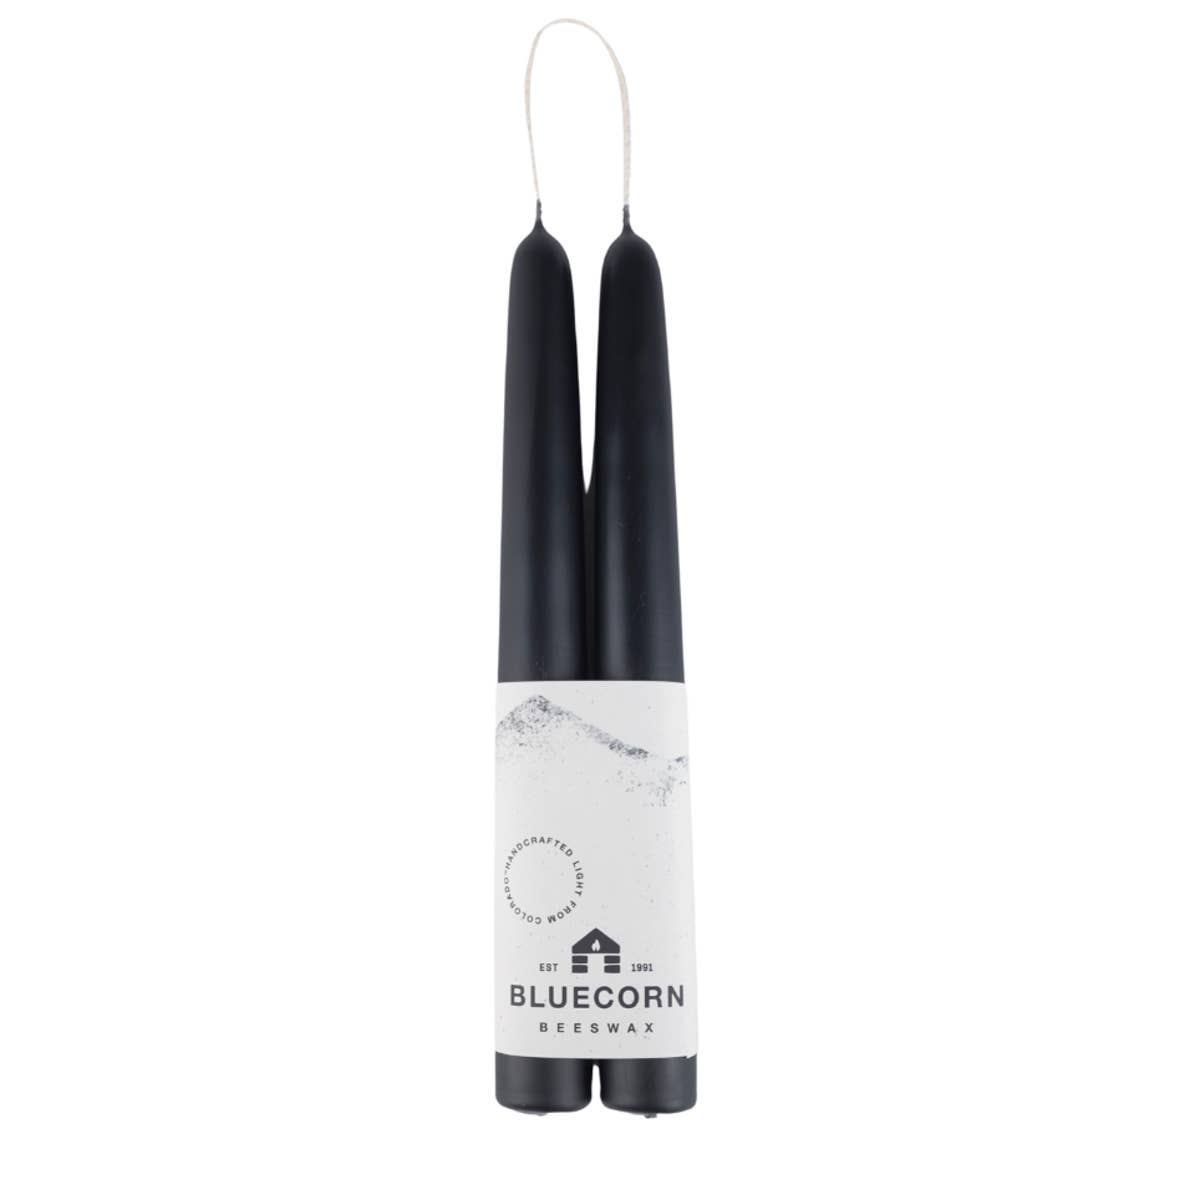 Bluecorn Candles - Pair of Hand-Dipped Beeswax Taper Candles: 8" / Eggplant Bluecorn Candles